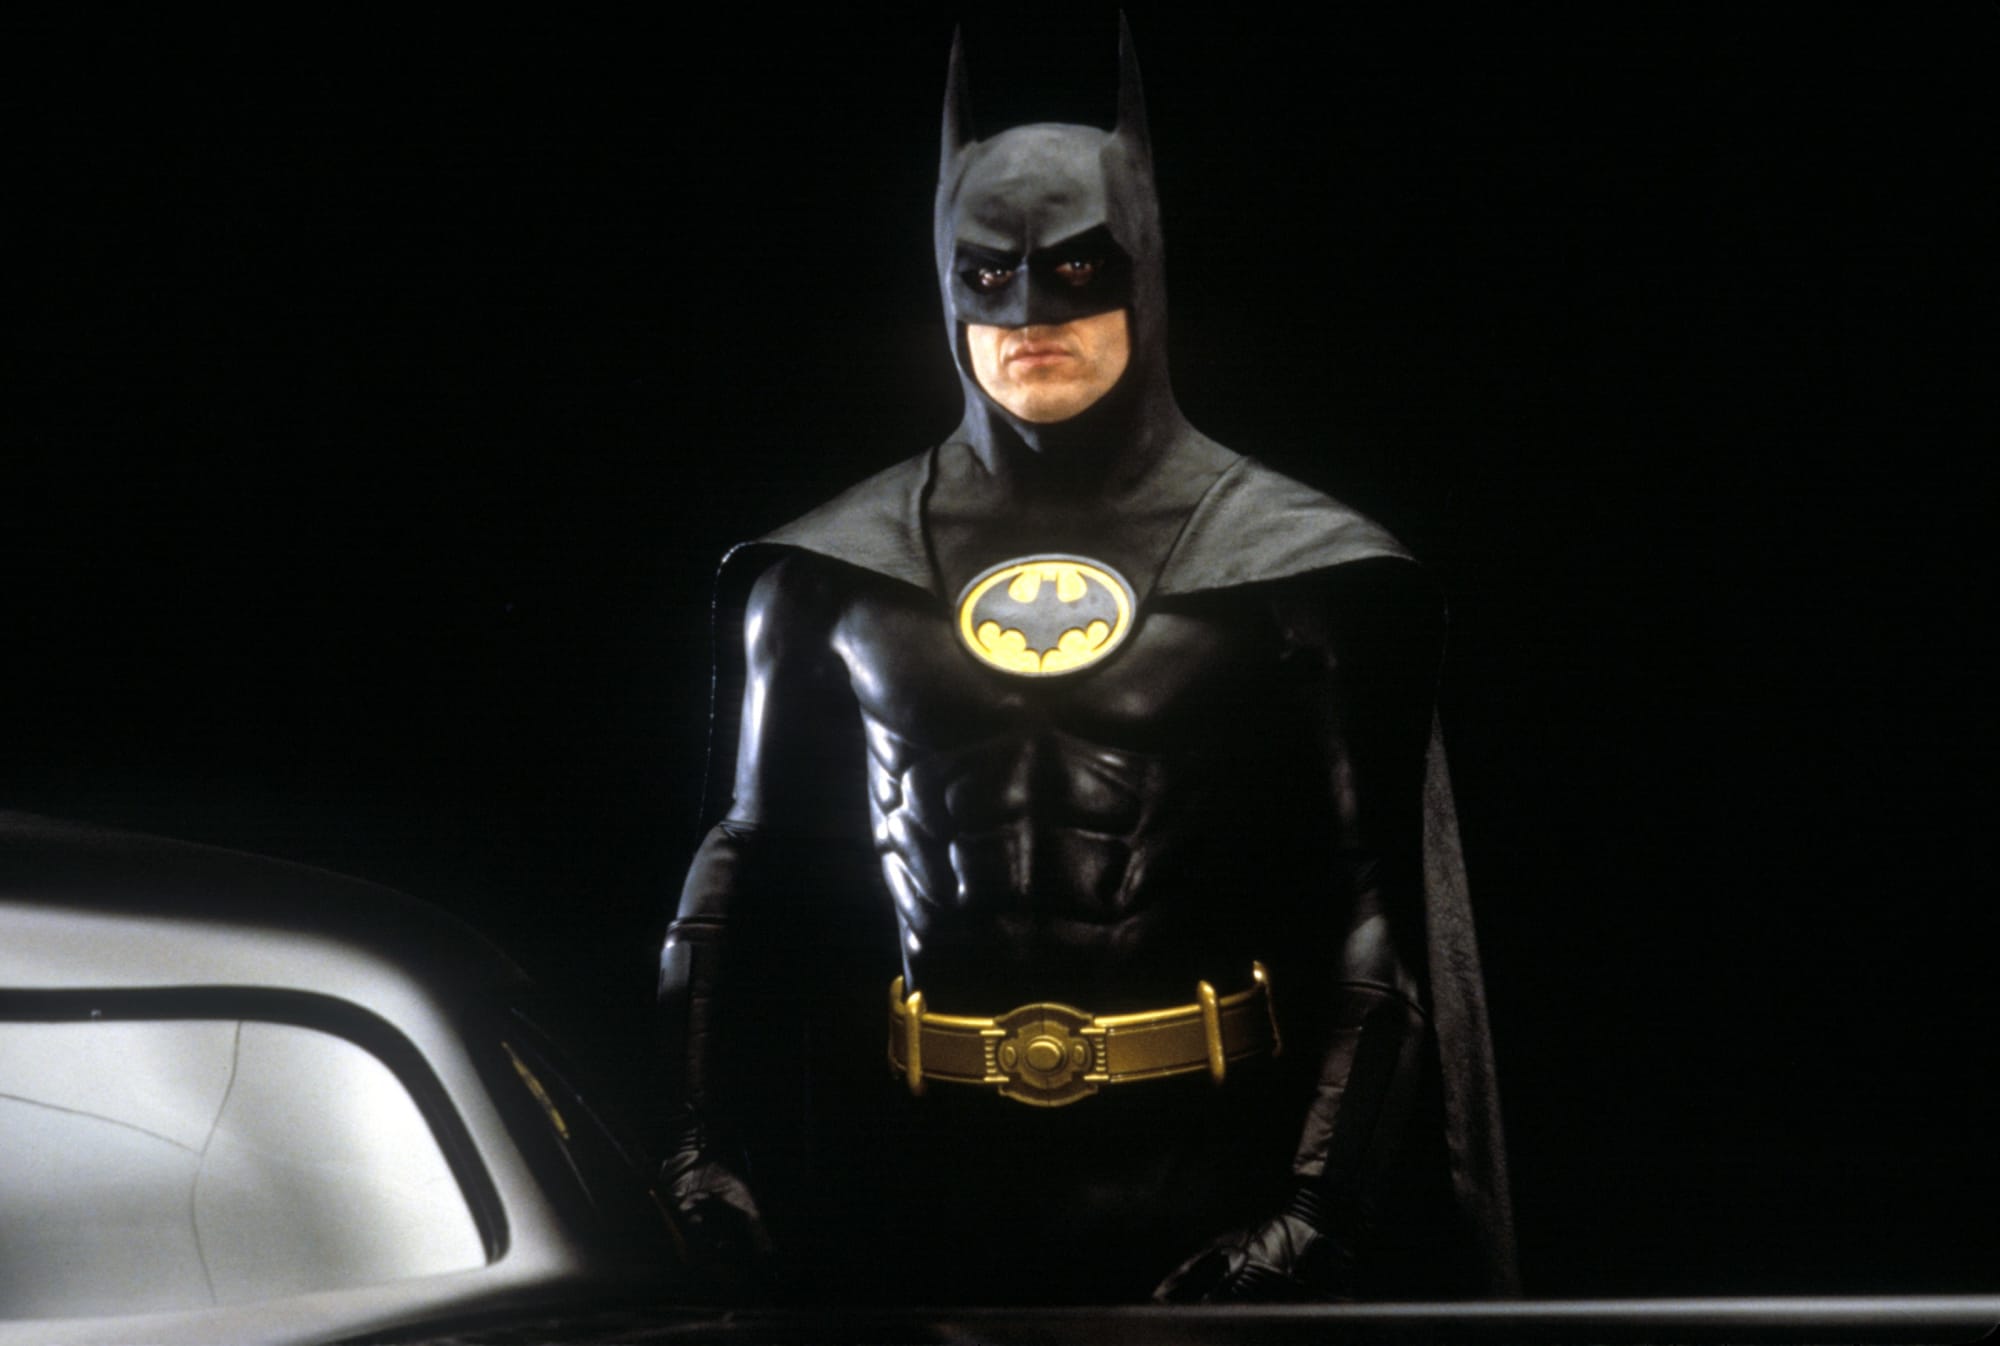 The Flash Michael Keaton's Batman suit is unveiled in jawdropping